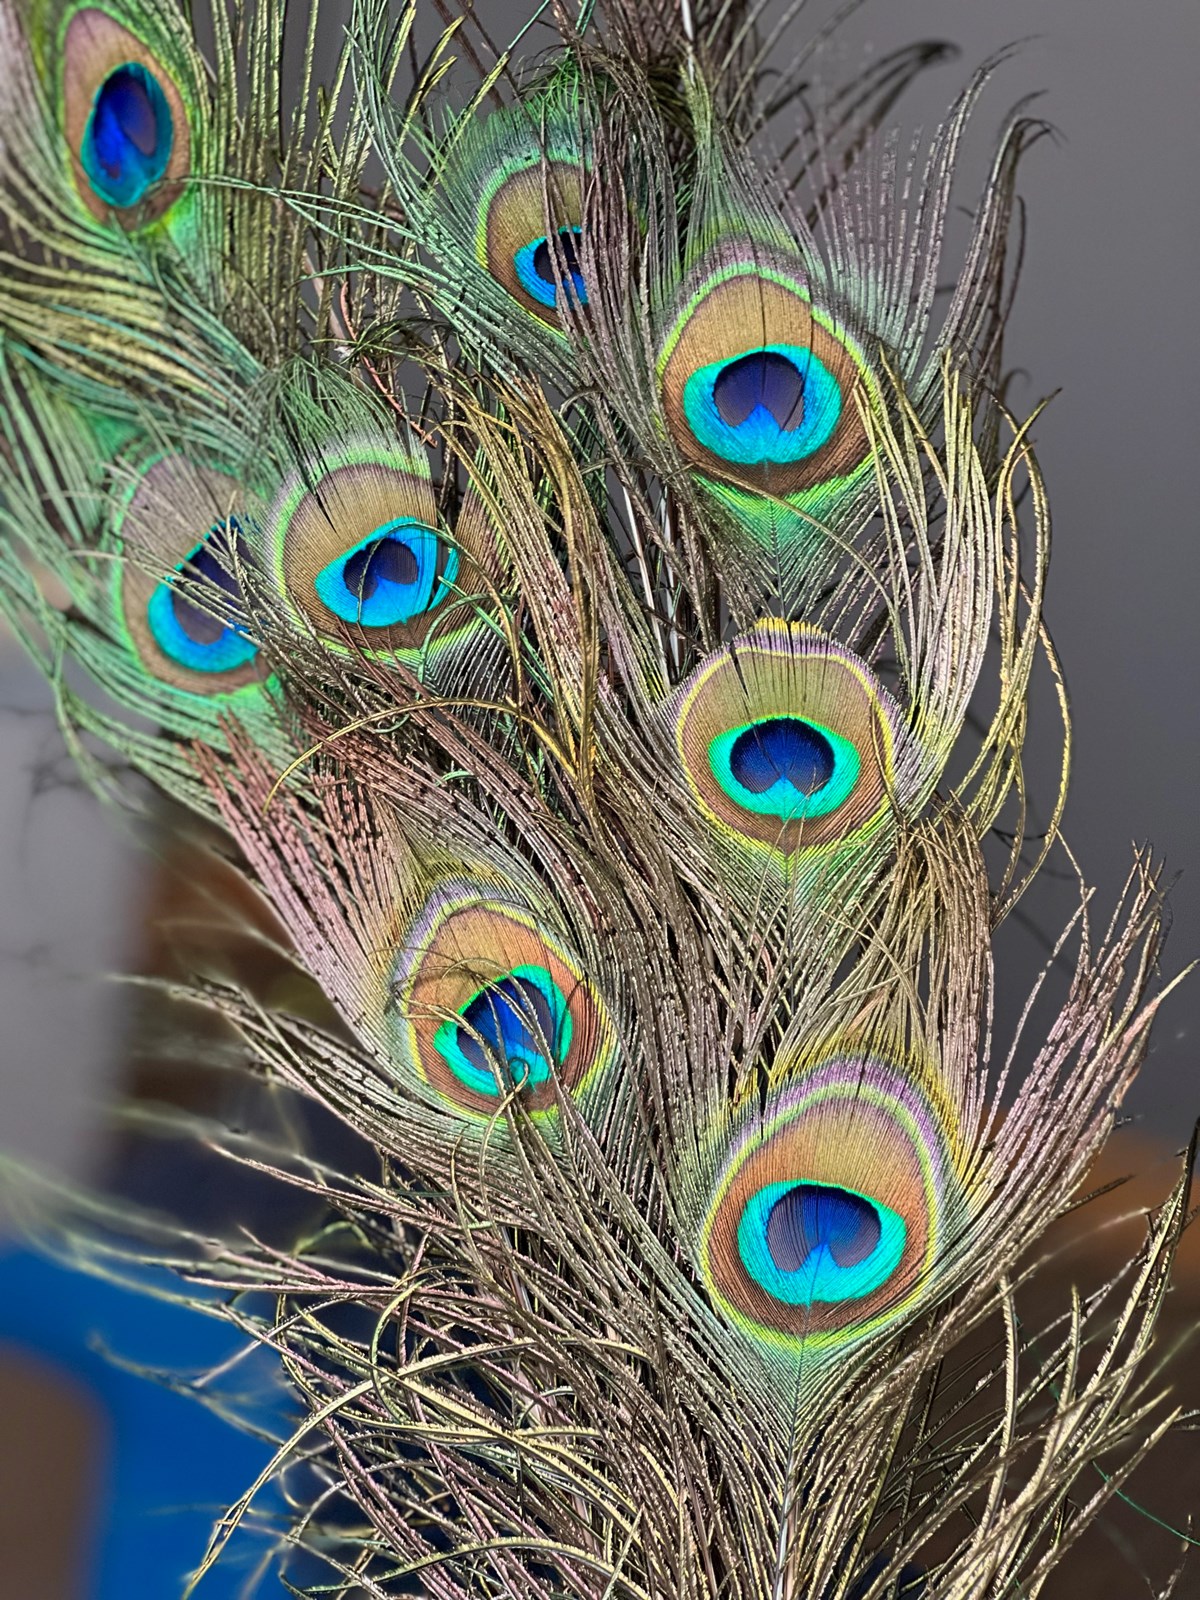 zoomed in image of 8 green peacock feathers with light and dark blue circles in the center